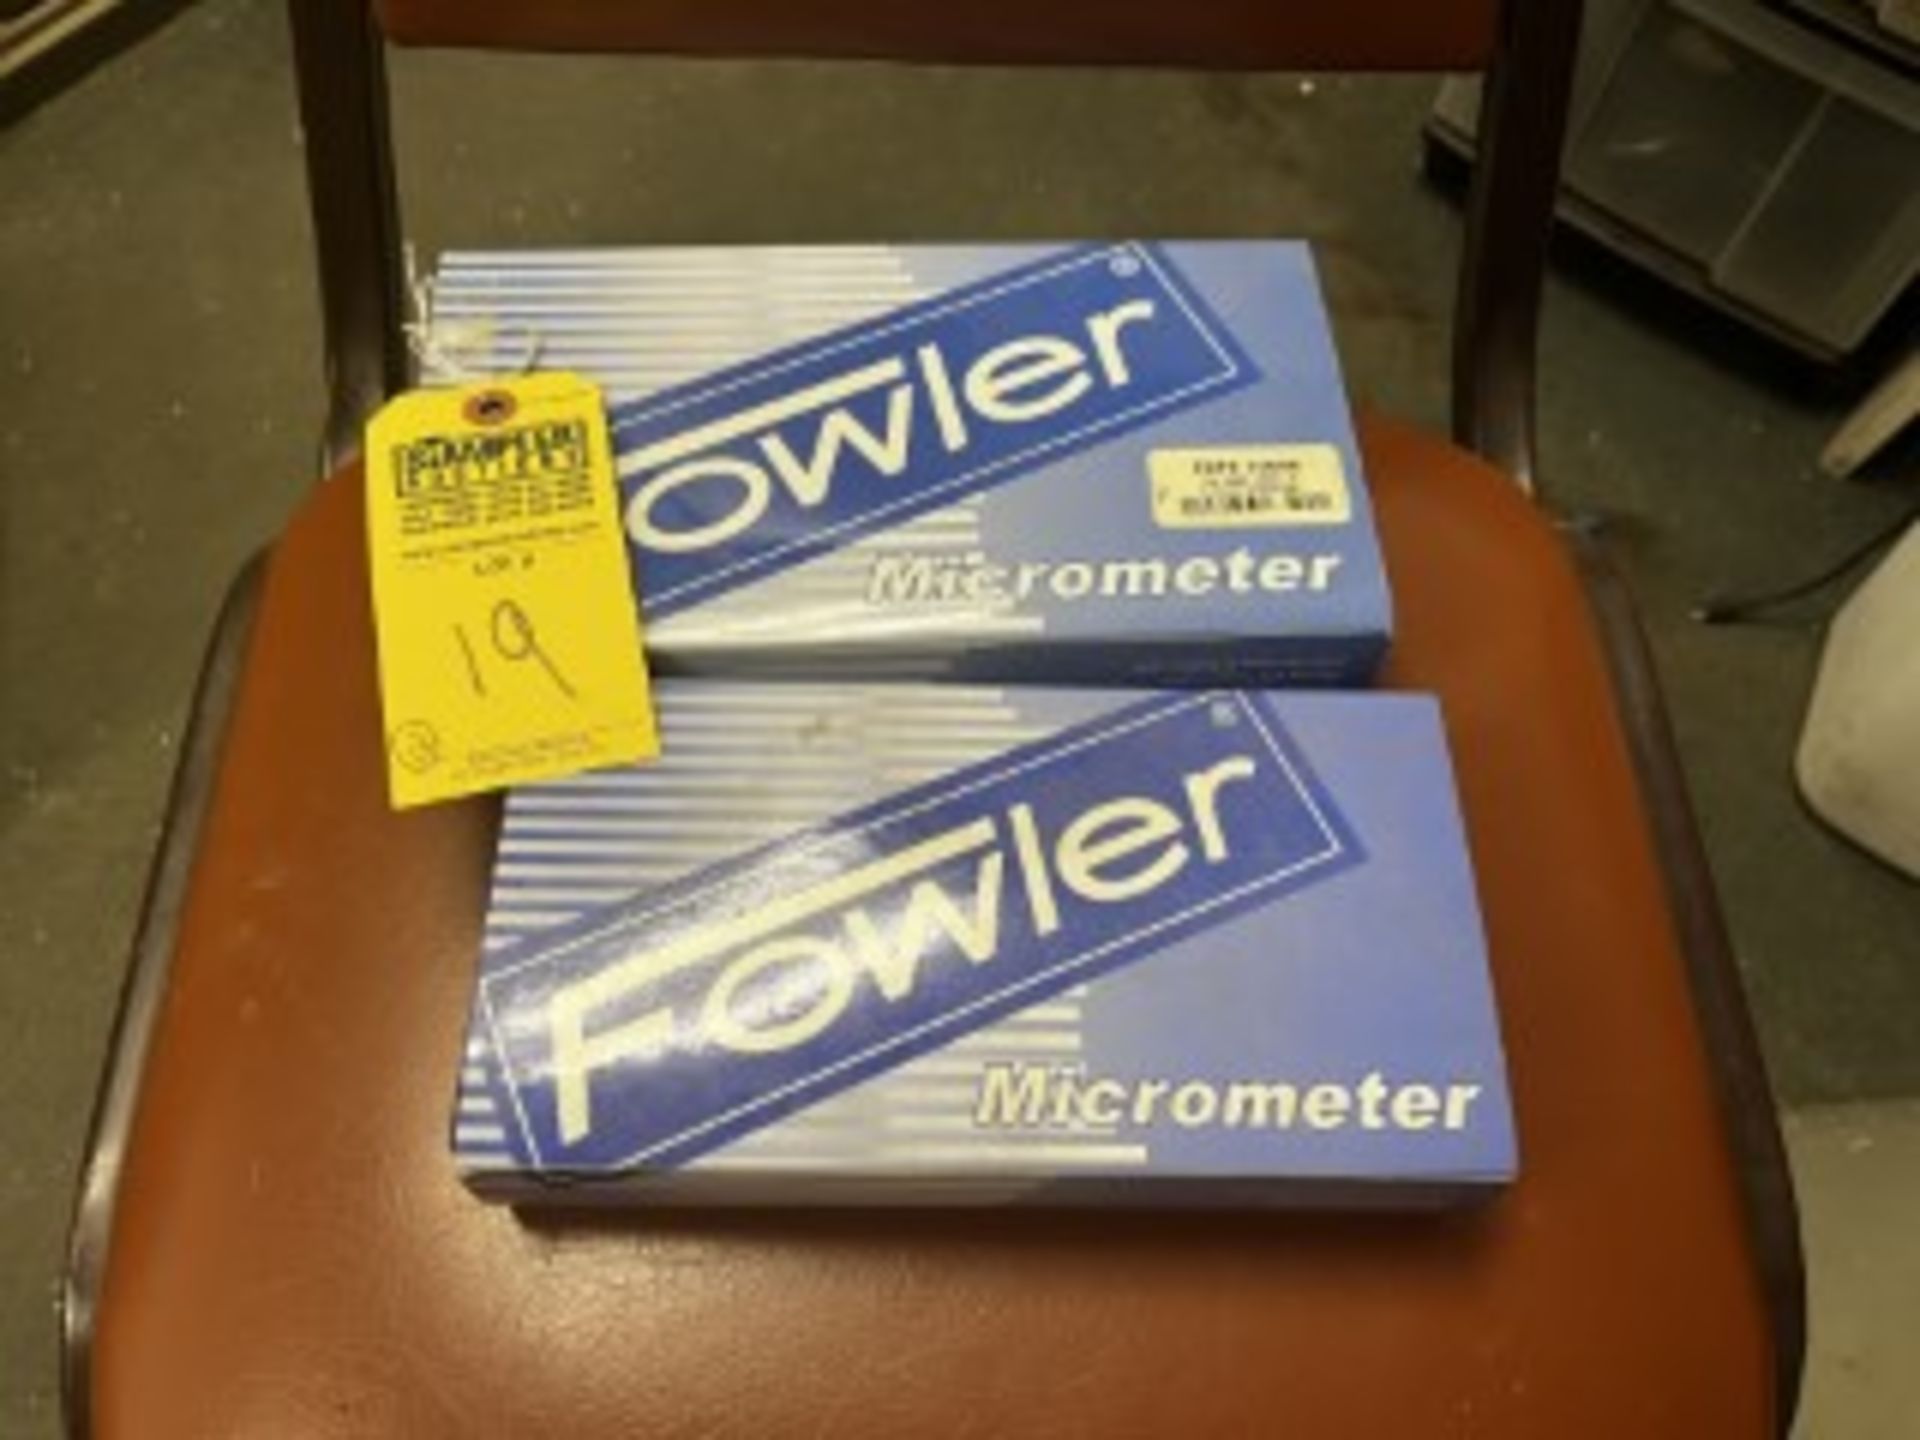 FOWLER ELECTRONIC BLADE MICROMETERS